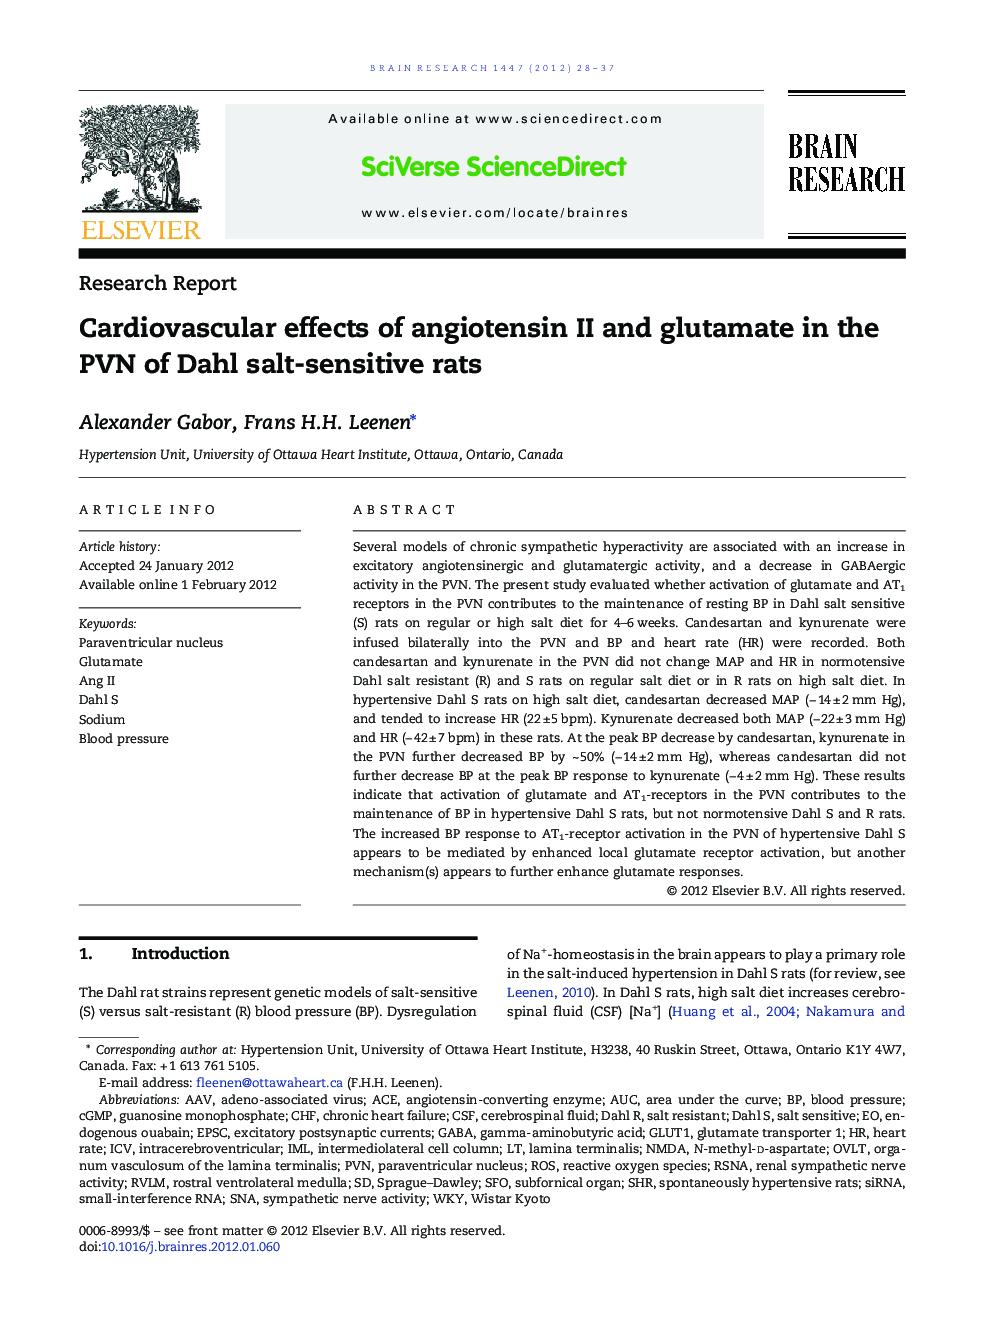 Cardiovascular effects of angiotensin II and glutamate in the PVN of Dahl salt-sensitive rats